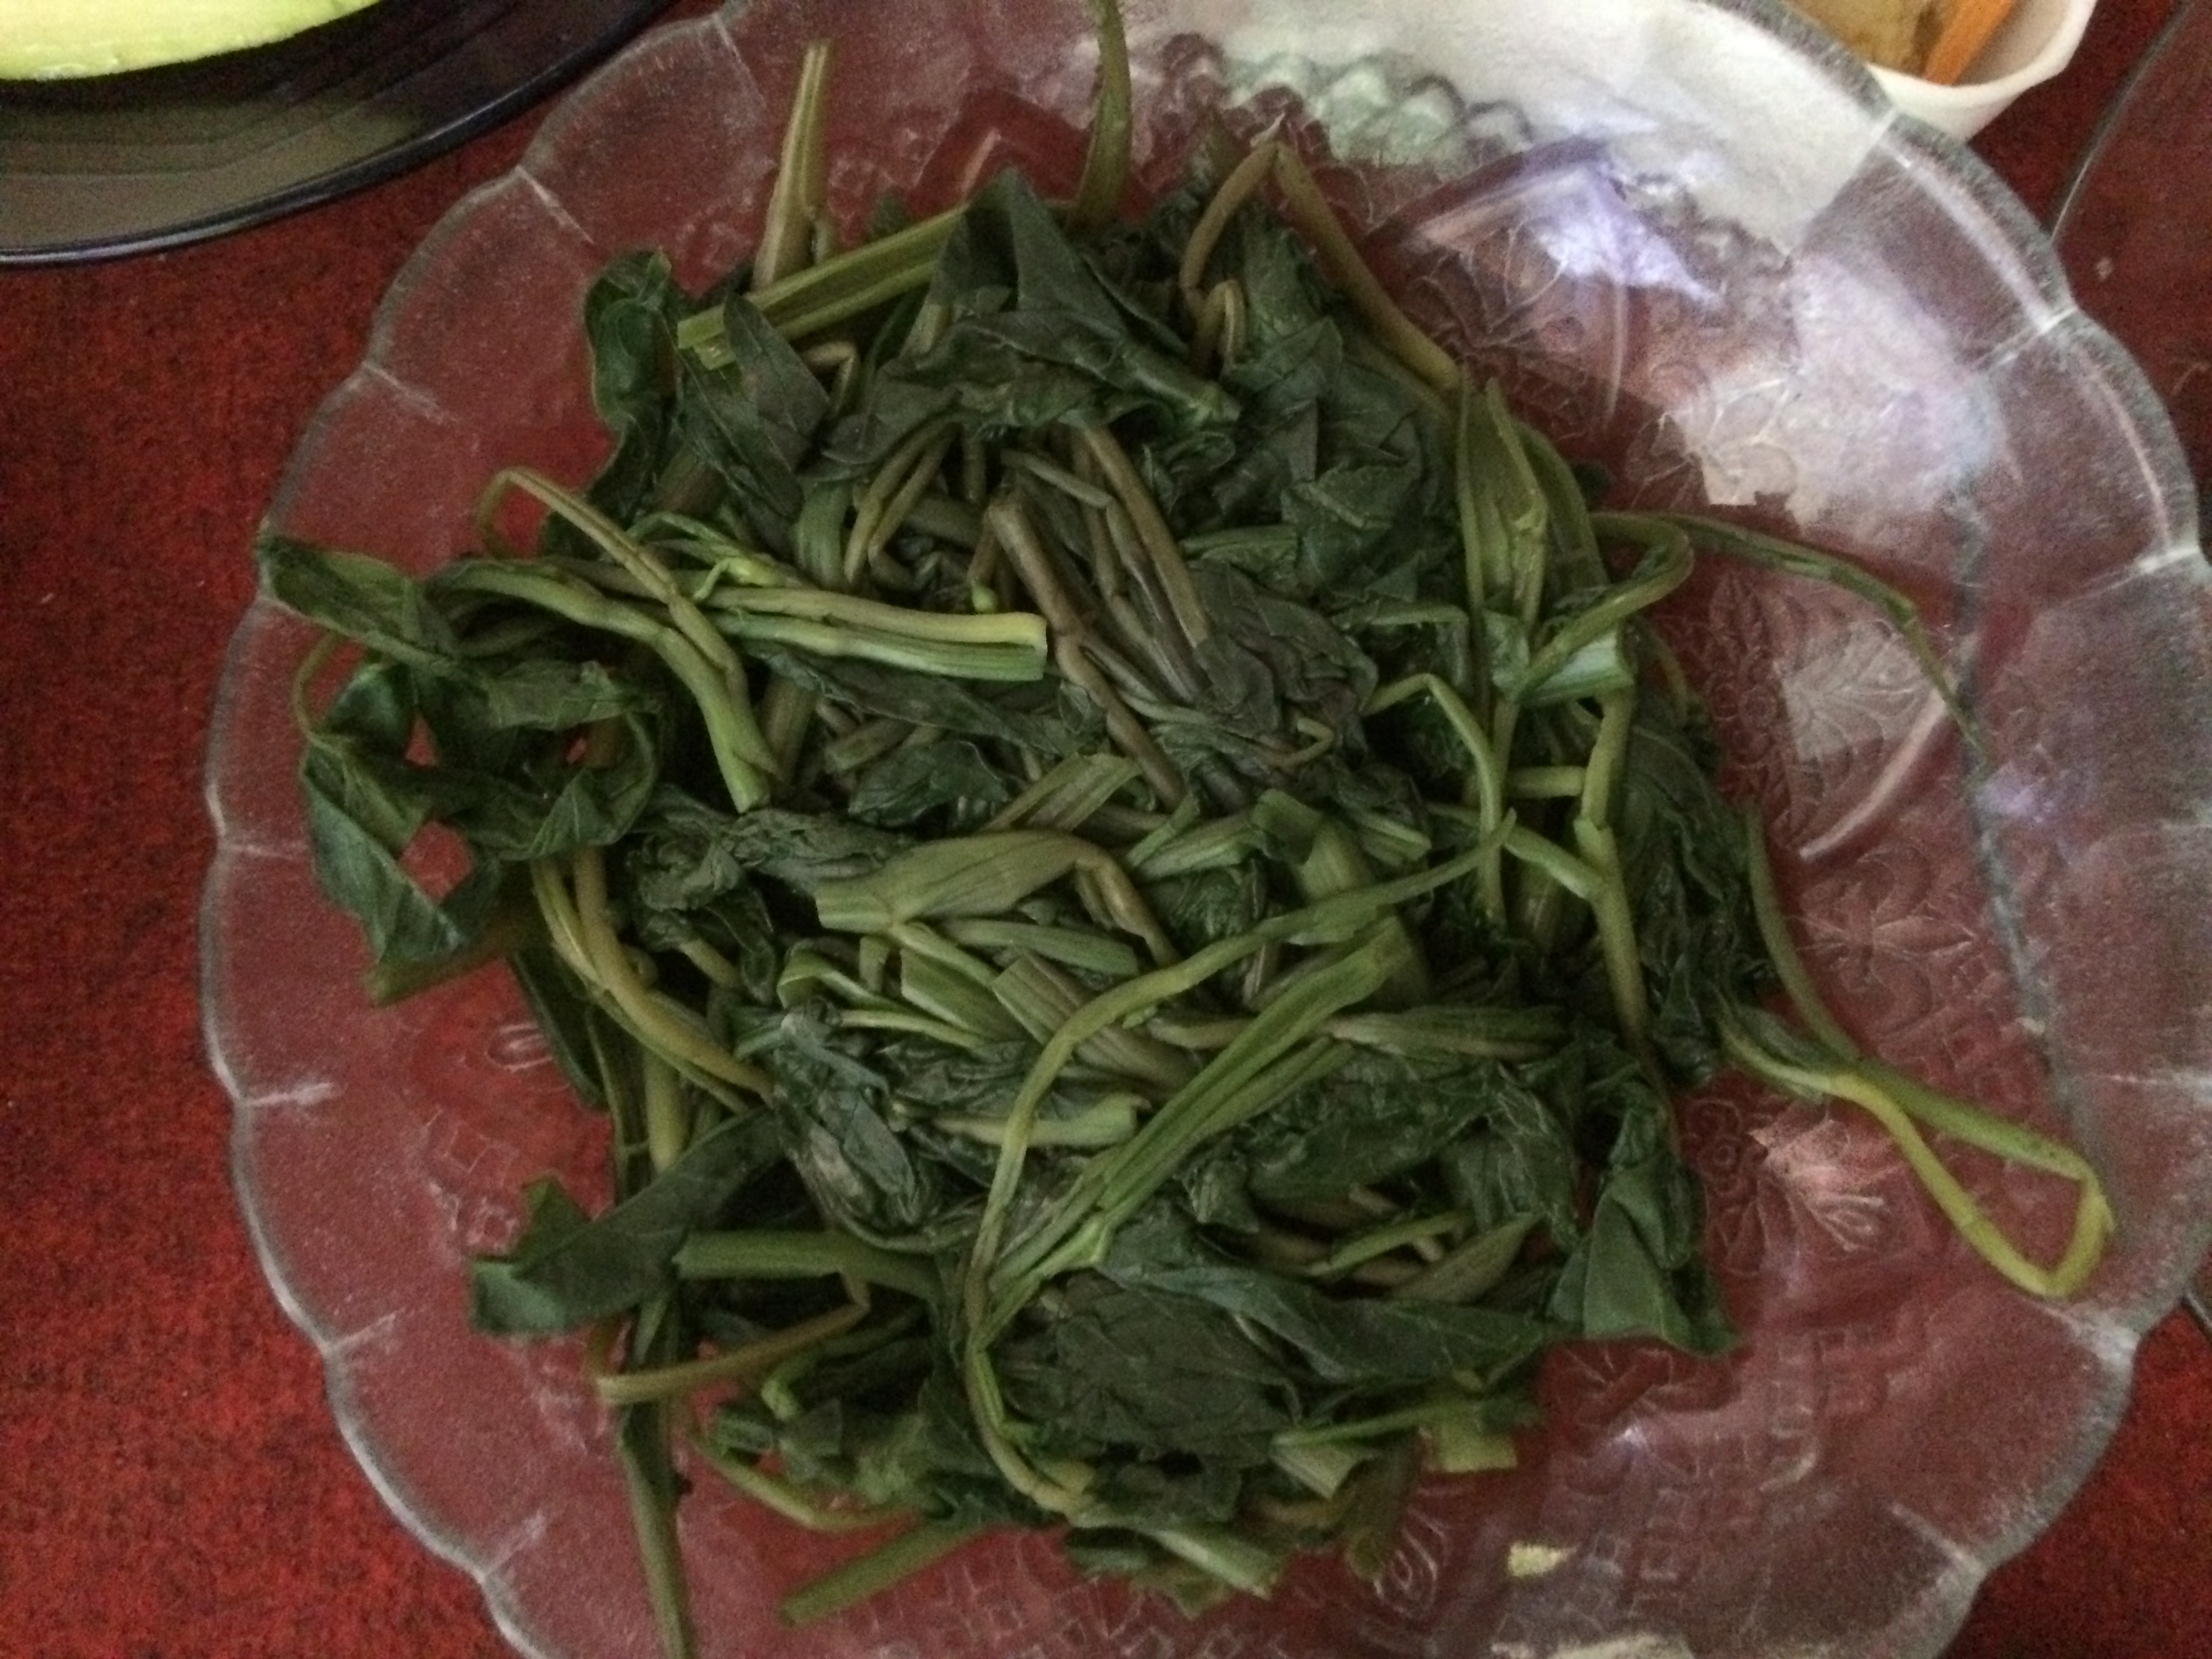 Cah kangkung (water spinach). Also highly common in Bengali cuisine.